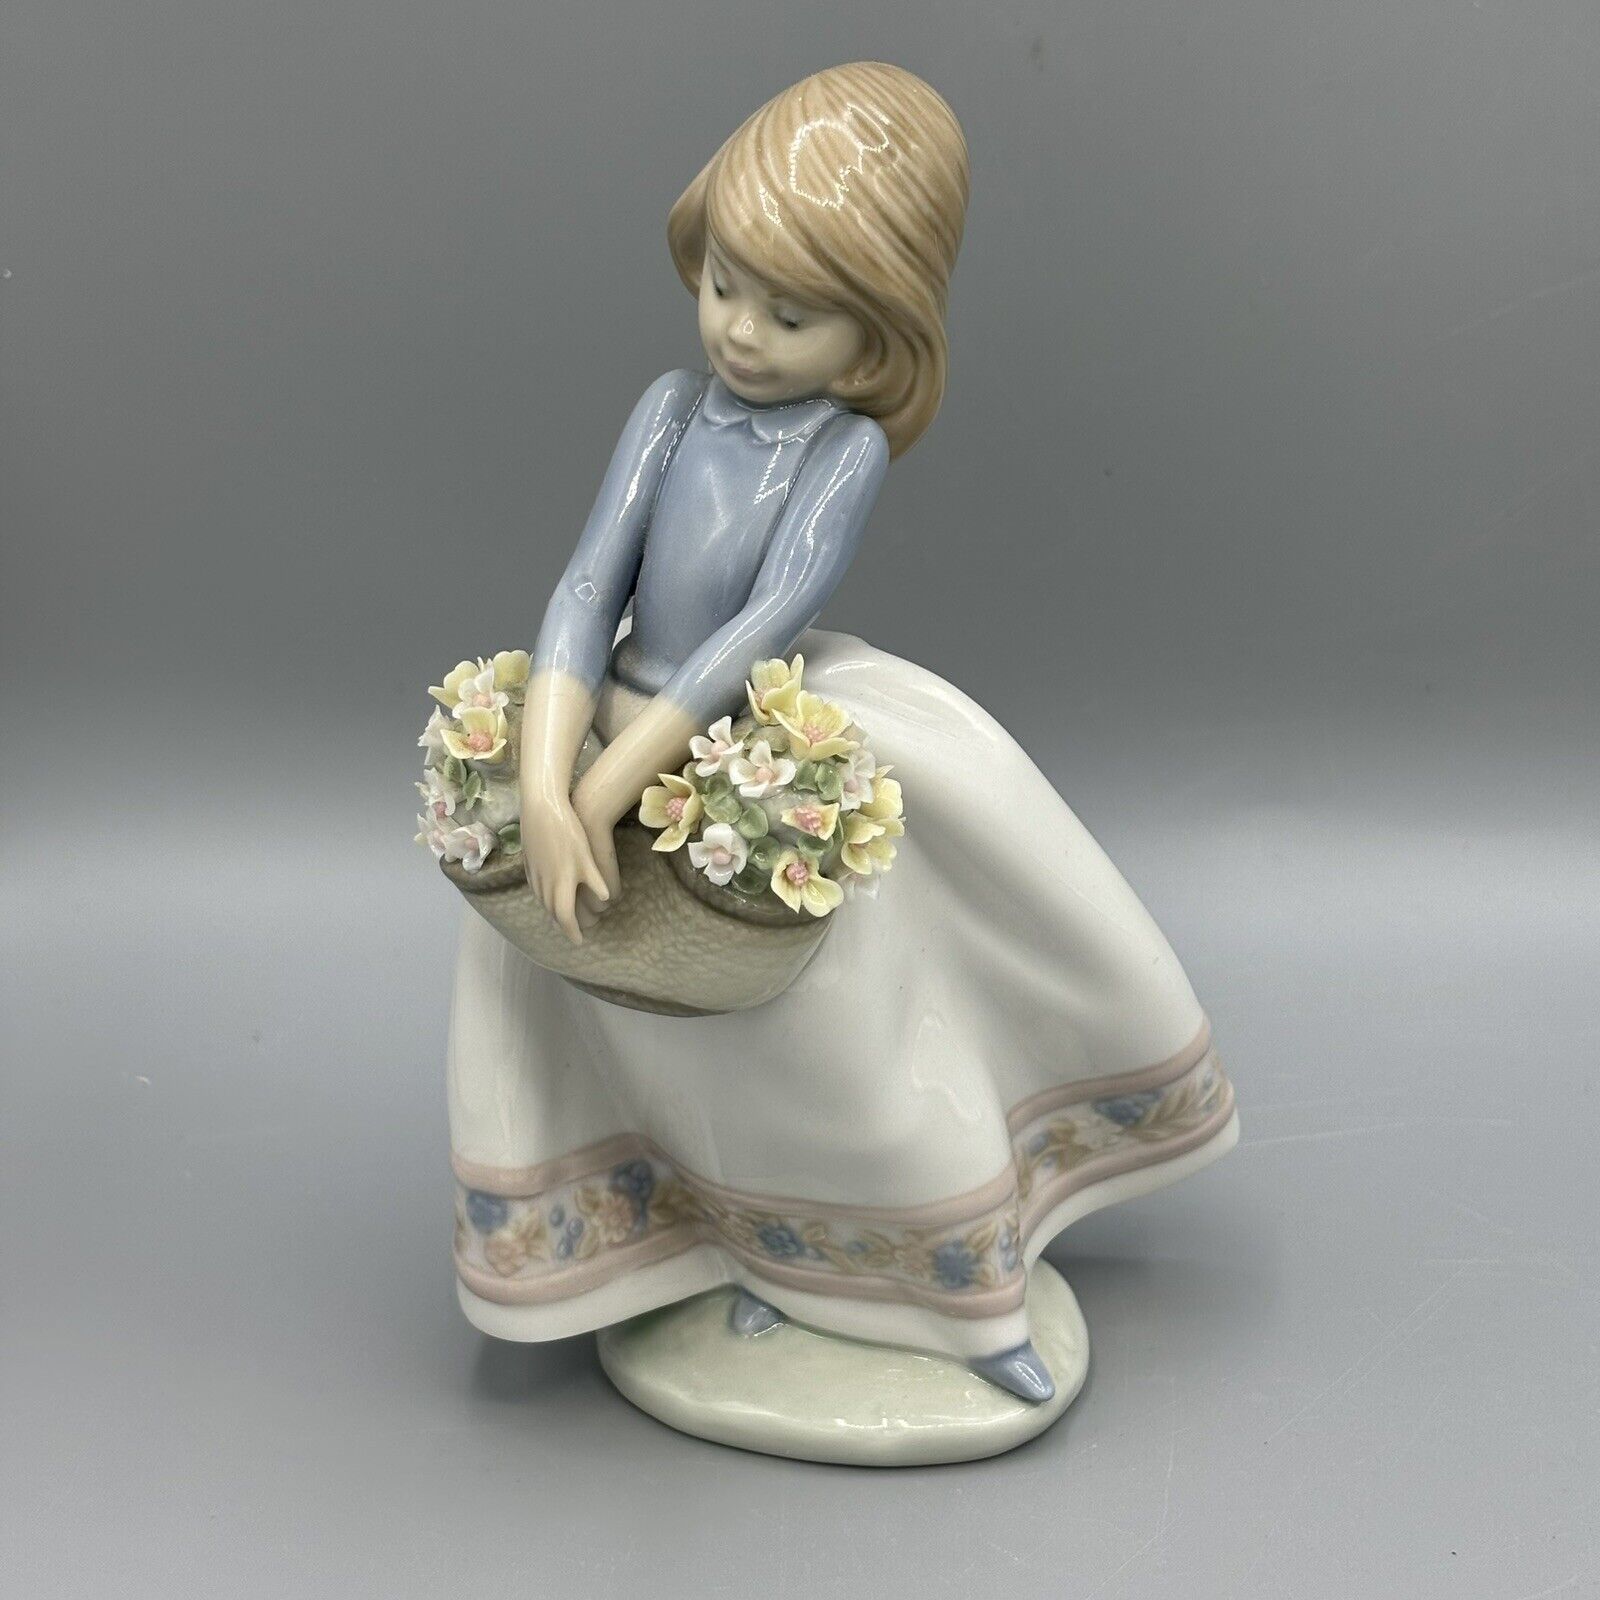 LLADRO Girl 5467 May Flowers Retired  No Box PLEASE READ 6.5” Adorable